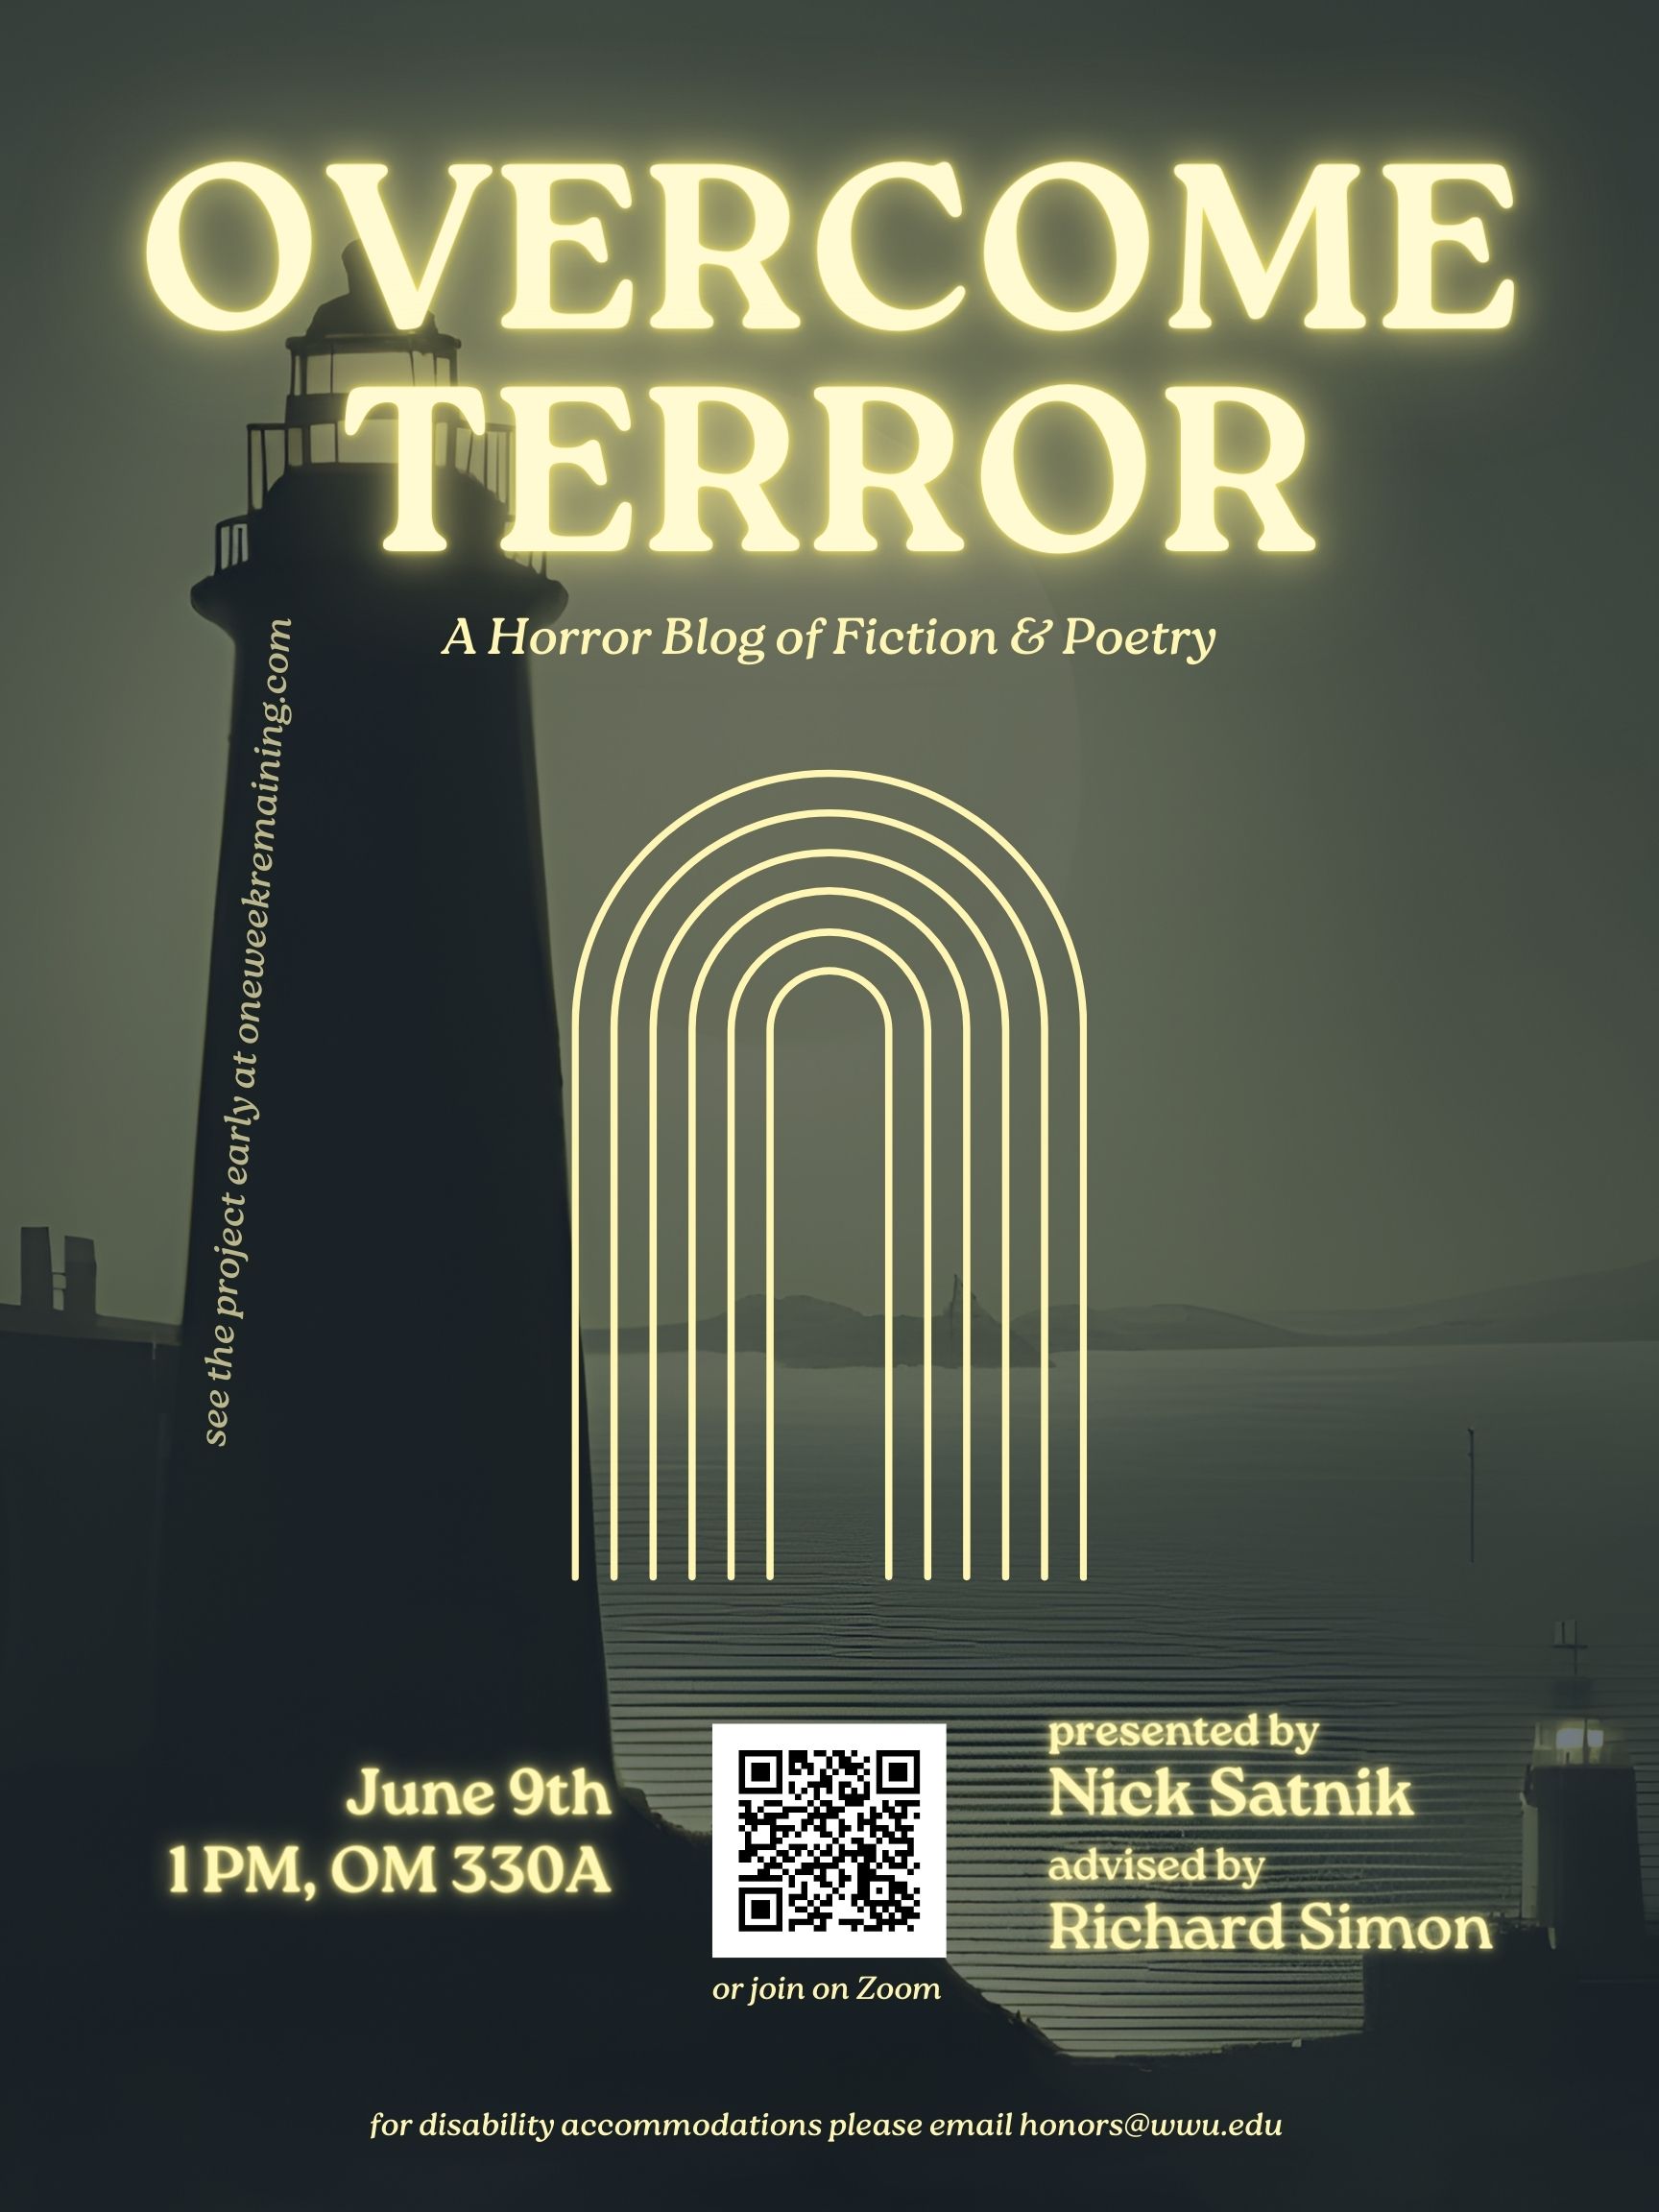 Dimmed background of a lighthouse, ocean, and distant shore. Yellow text reads: "OVERCOME TERROR, A Horror Blog of Fiction & Poetry, June 9th 1PM, OM 330A, presented by Nick Satnik, advised by Richard Simon. For disability accommodations please email honors@wwu.edu." In the center of the page is a graphic of a series of six arch shaped lines, one inside the other. A QR code (https://wwu-edu.zoom.us/j/9085756172) sits in the bottom center of the page with text underneath which reads: "or join on Zoom".